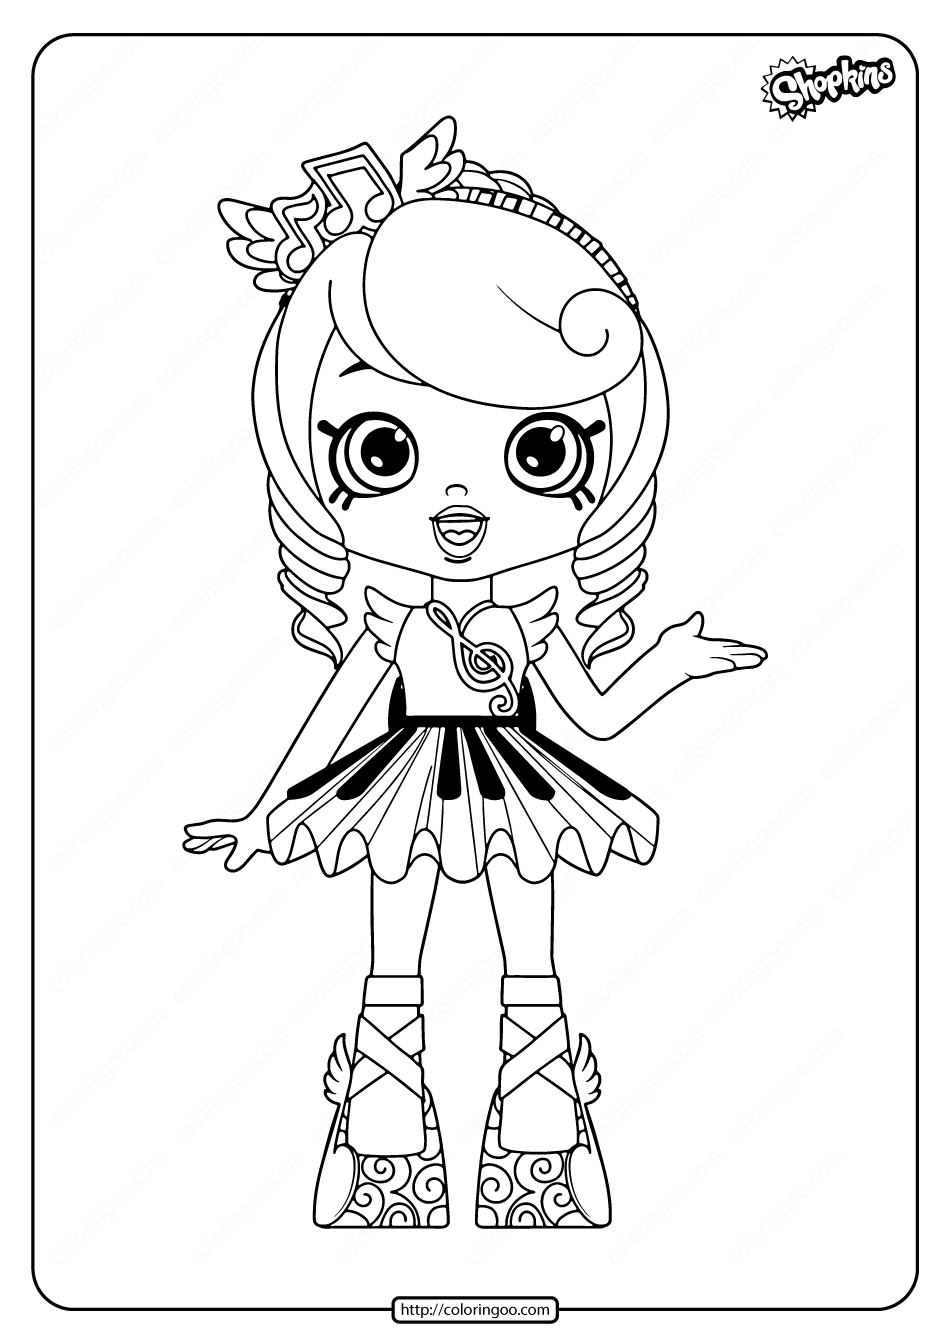 printable shopkins melodine coloring pages